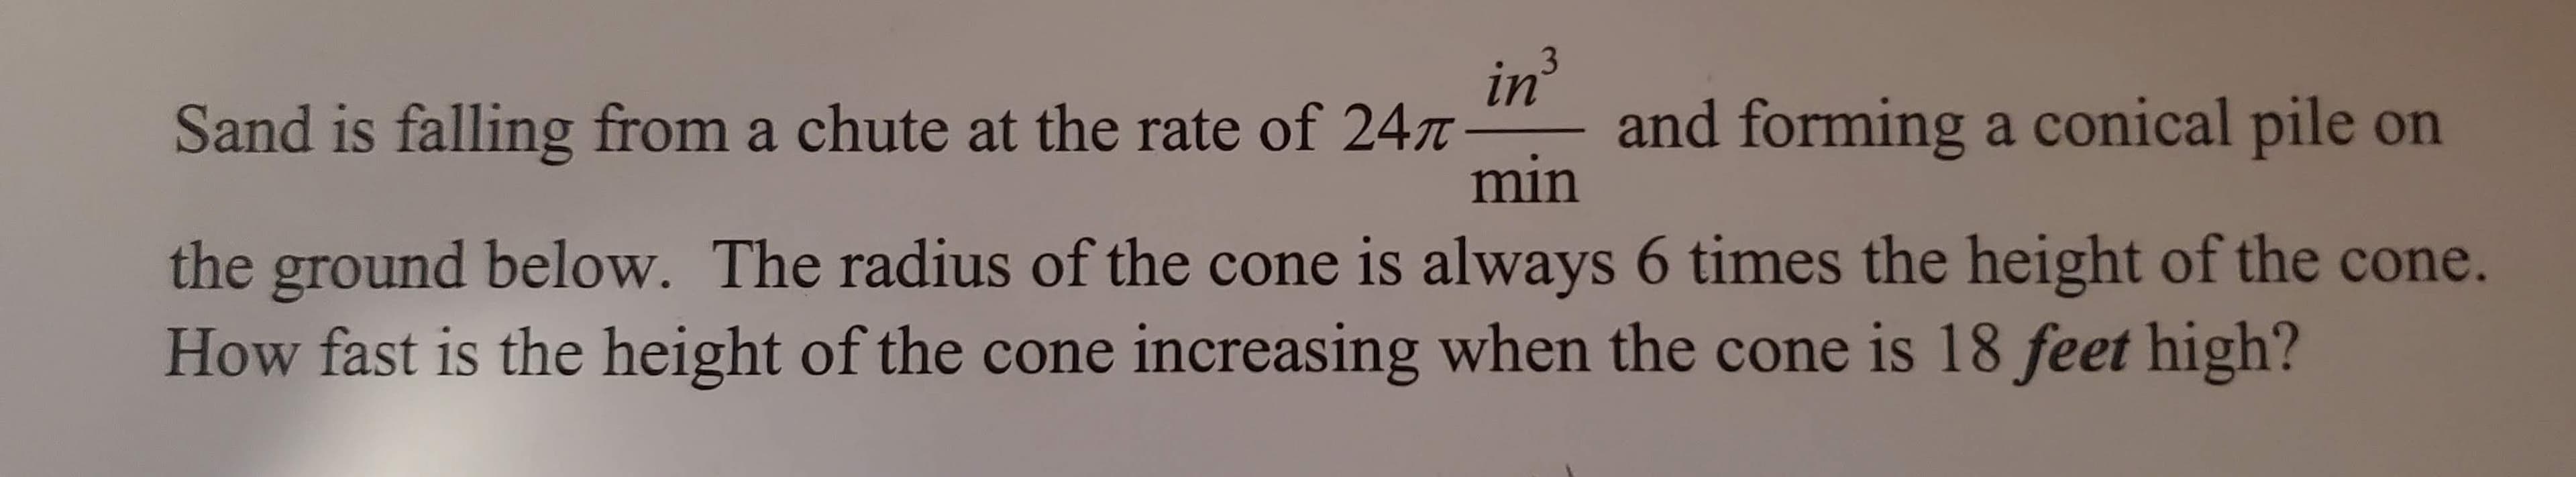 Sand is falling from a chute at the rate of 24 -
in
and forming a conical pile on
min
3
the ground below. The radius of the cone is always 6 times the height of the cone.
How fast is the height of the cone increasing when the cone is 18 feet high?
